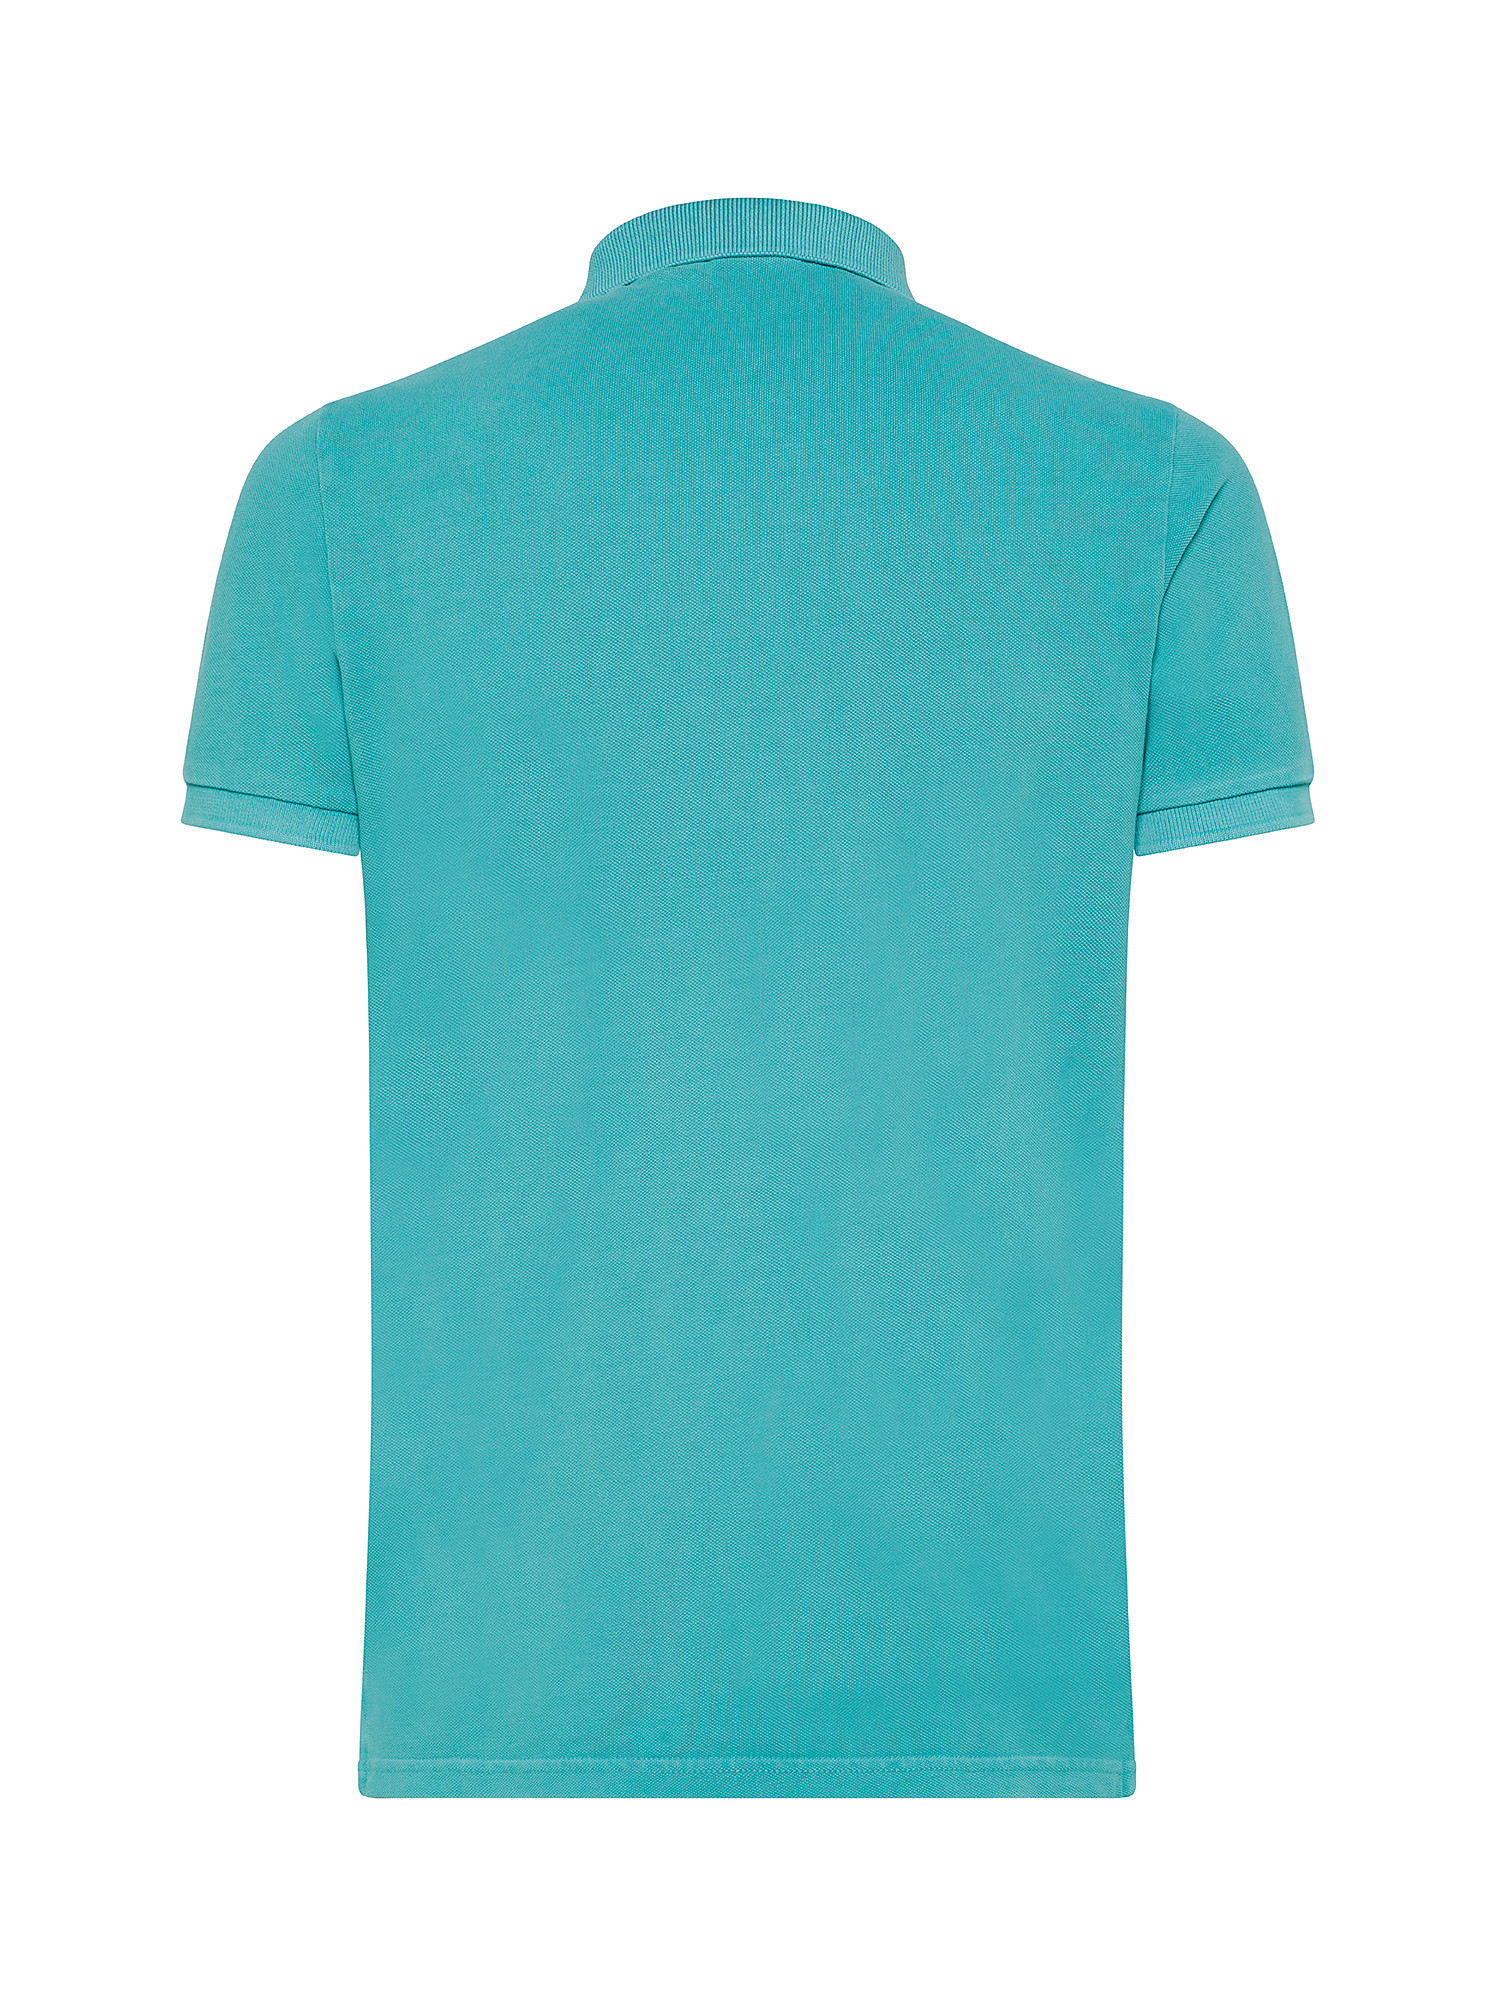 Superdry - Cotton piqué polo shirt with logo, Light Blue, large image number 1